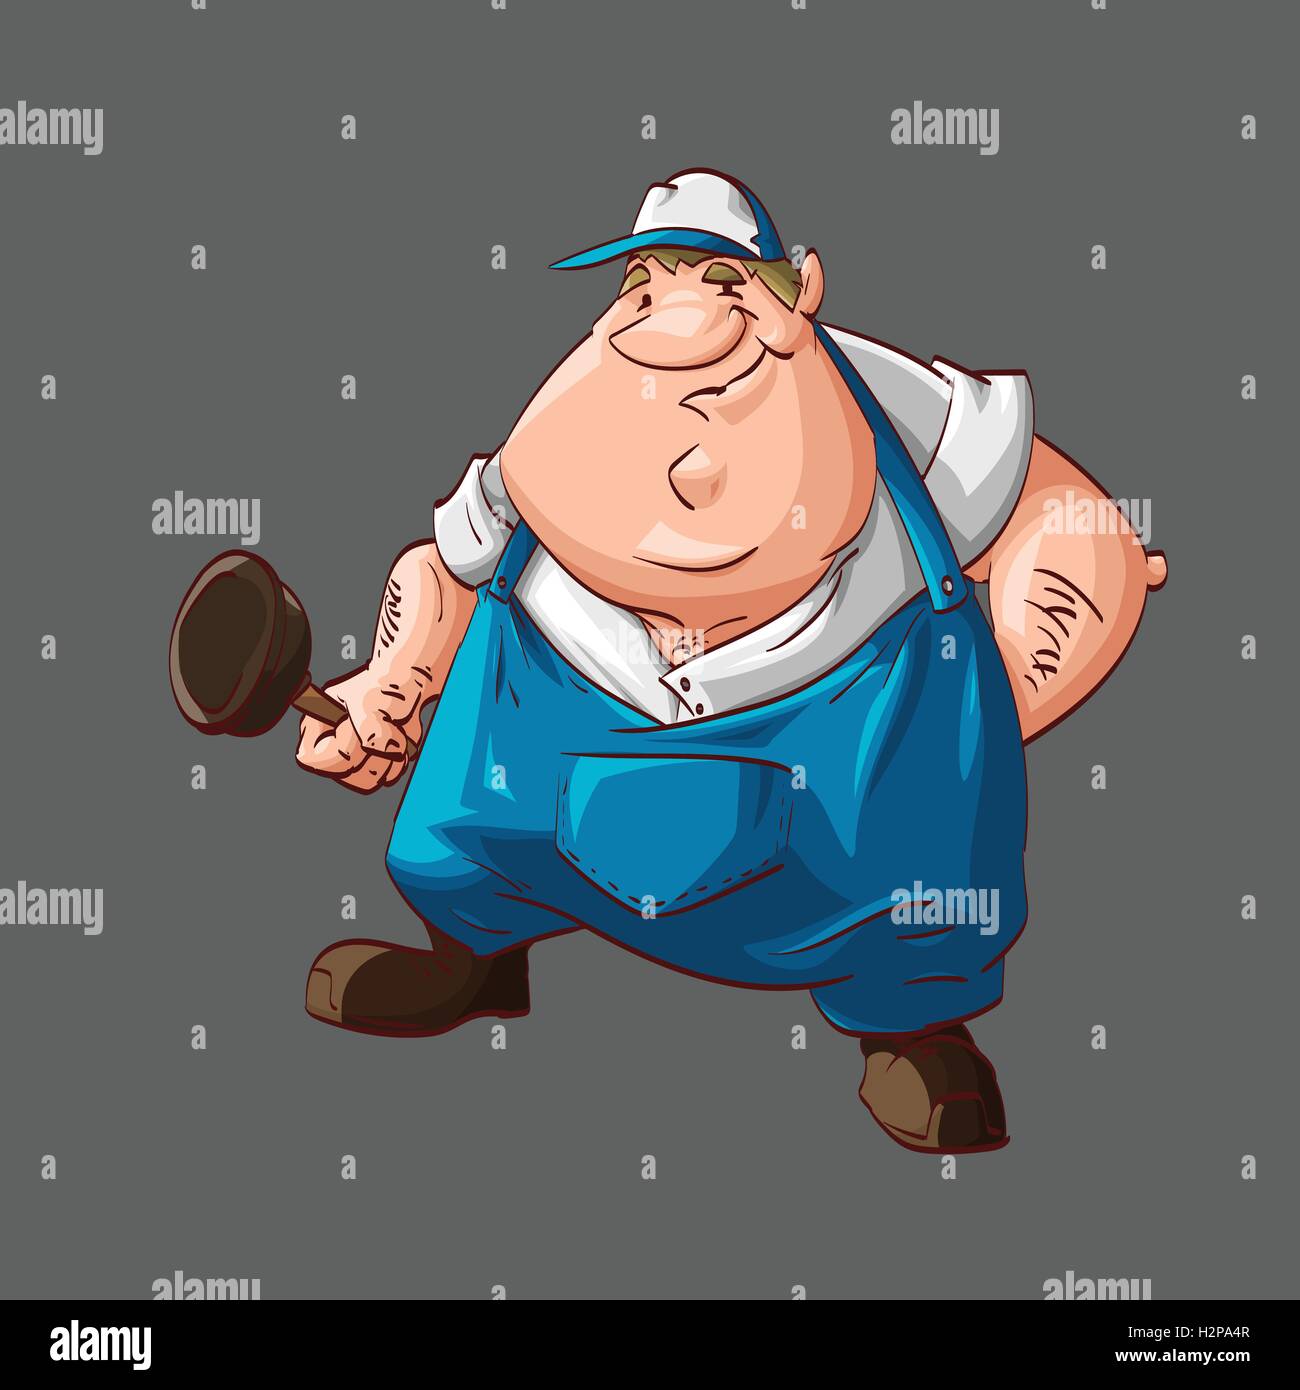 Colorful vector illustration of a cartoon fat plumber, with blue working clothes, hat and holding a plunger. Stock Vector